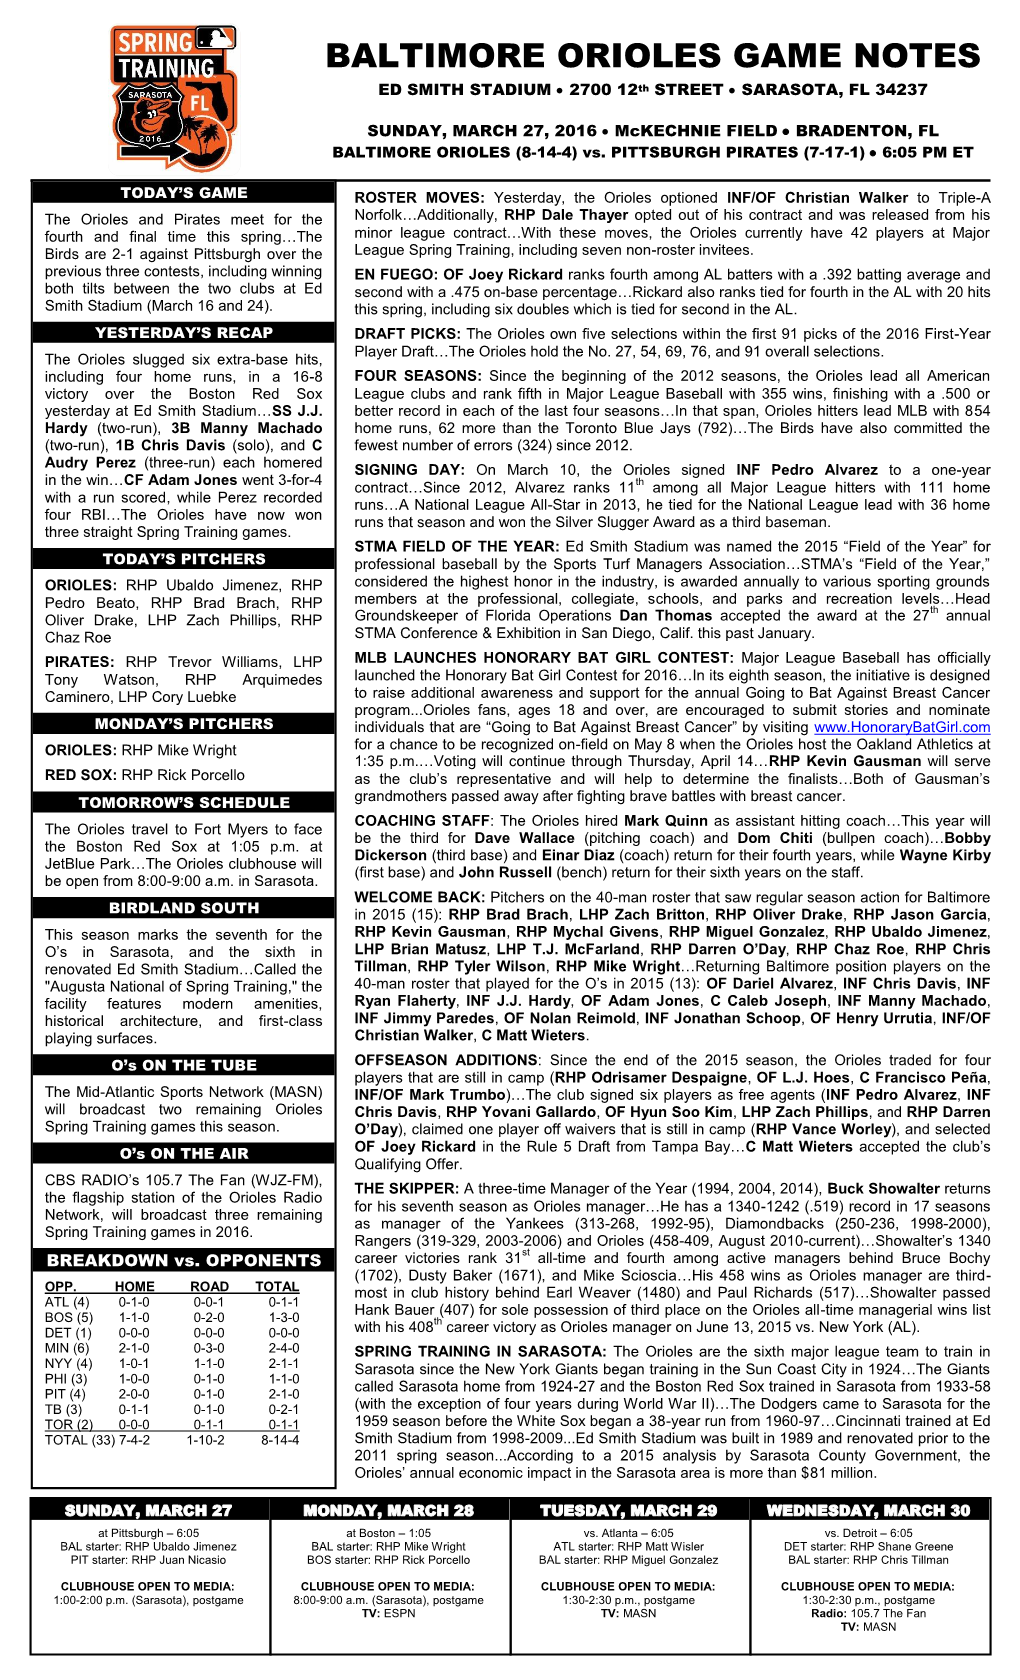 Orioles Game Information • August 26, 2008